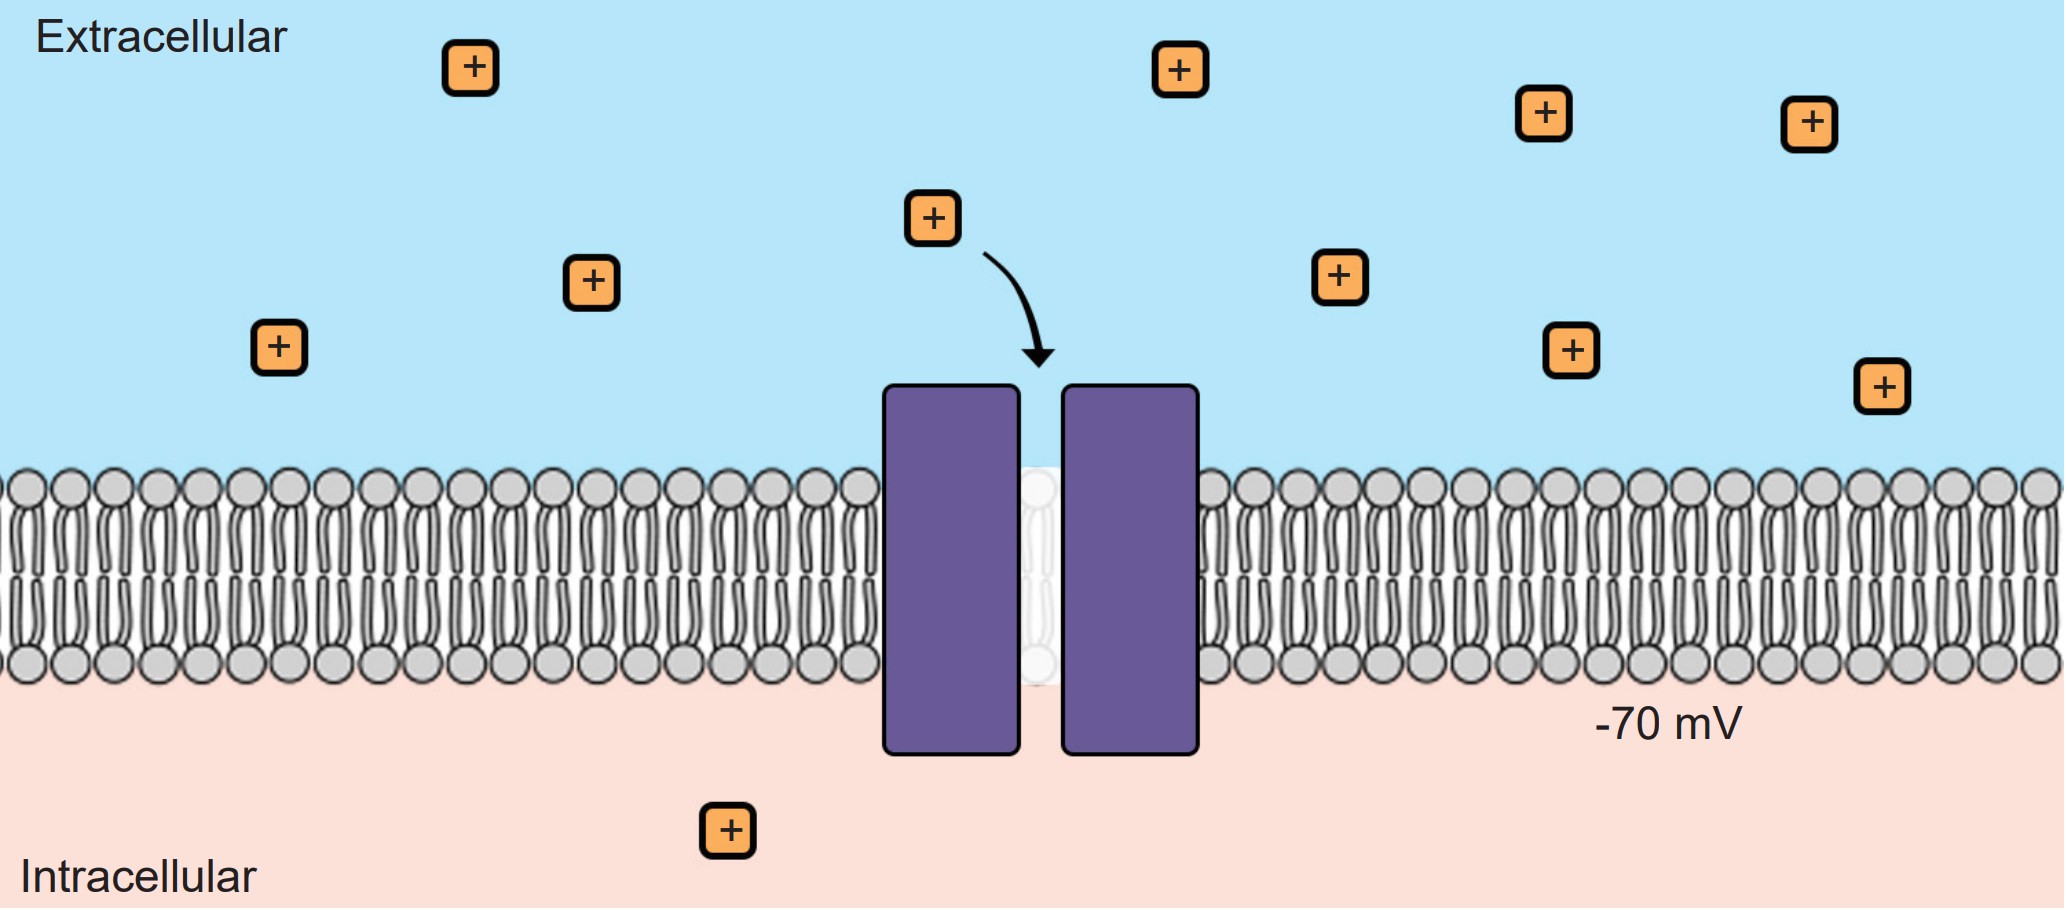 Visualization of how positively charged ions move into a negatively charged cell when sodium channels open